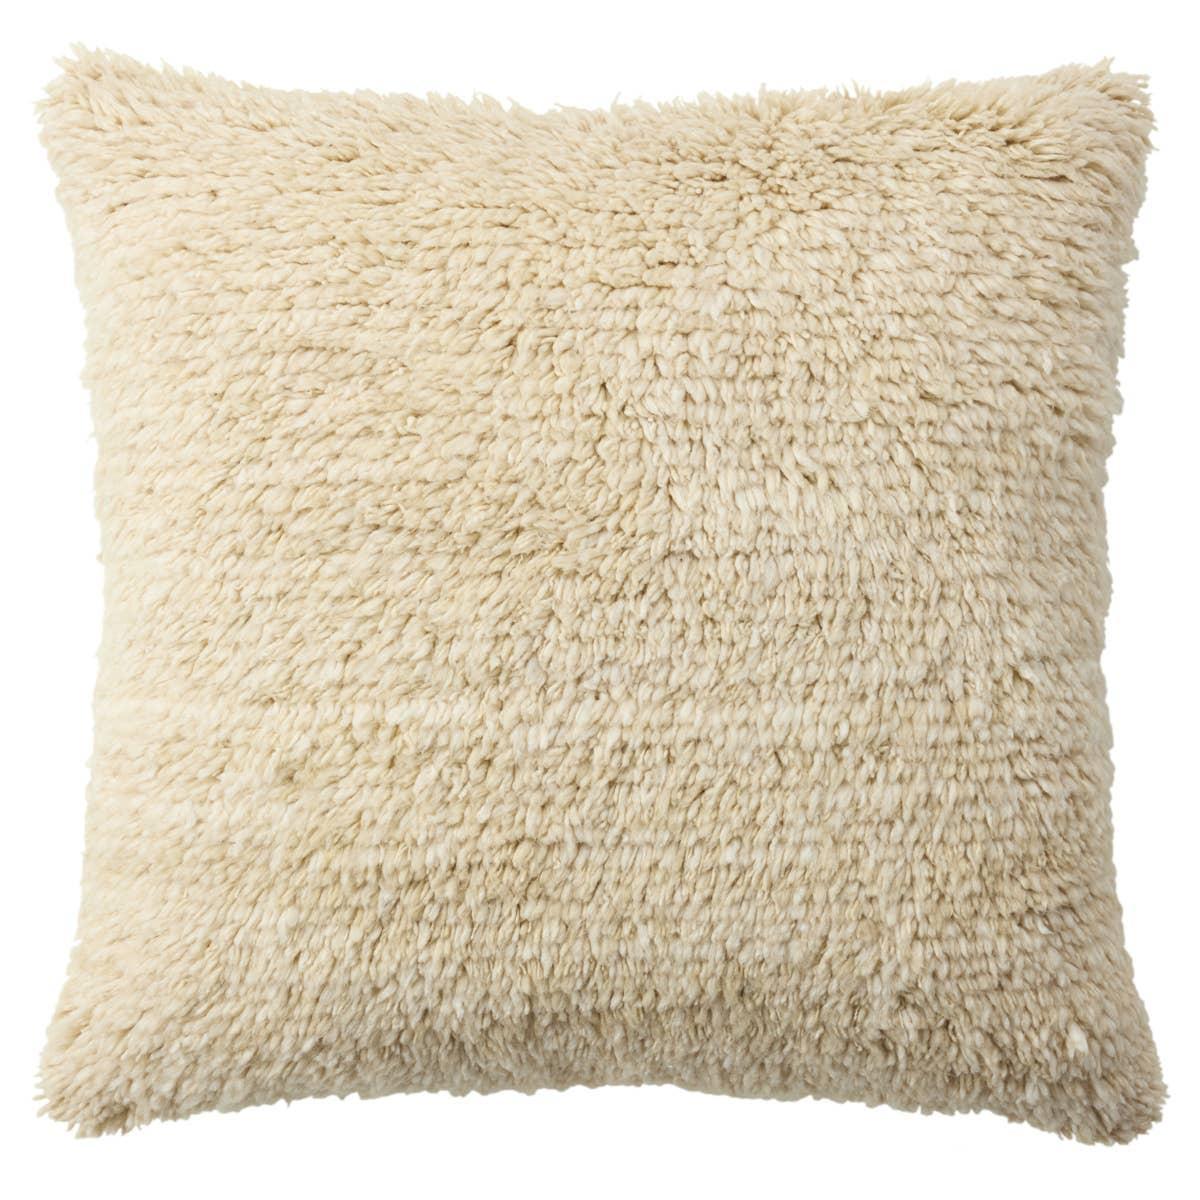 The hand-knotted Montane Jardine imbues spaces with modern Moroccan vibes and high-quality craftsmanship. This richly textured assortment of pillows features premium wool and silk blended fibers and an exceptional Persian knot quality. The shag Jardine pillow delights in a cozy cream colorway, creating an easy-to-decorate-with accent piece. Amethyst Home provides interior design, new home construction design consulting, vintage area rugs, and lighting in the Dallas metro area.